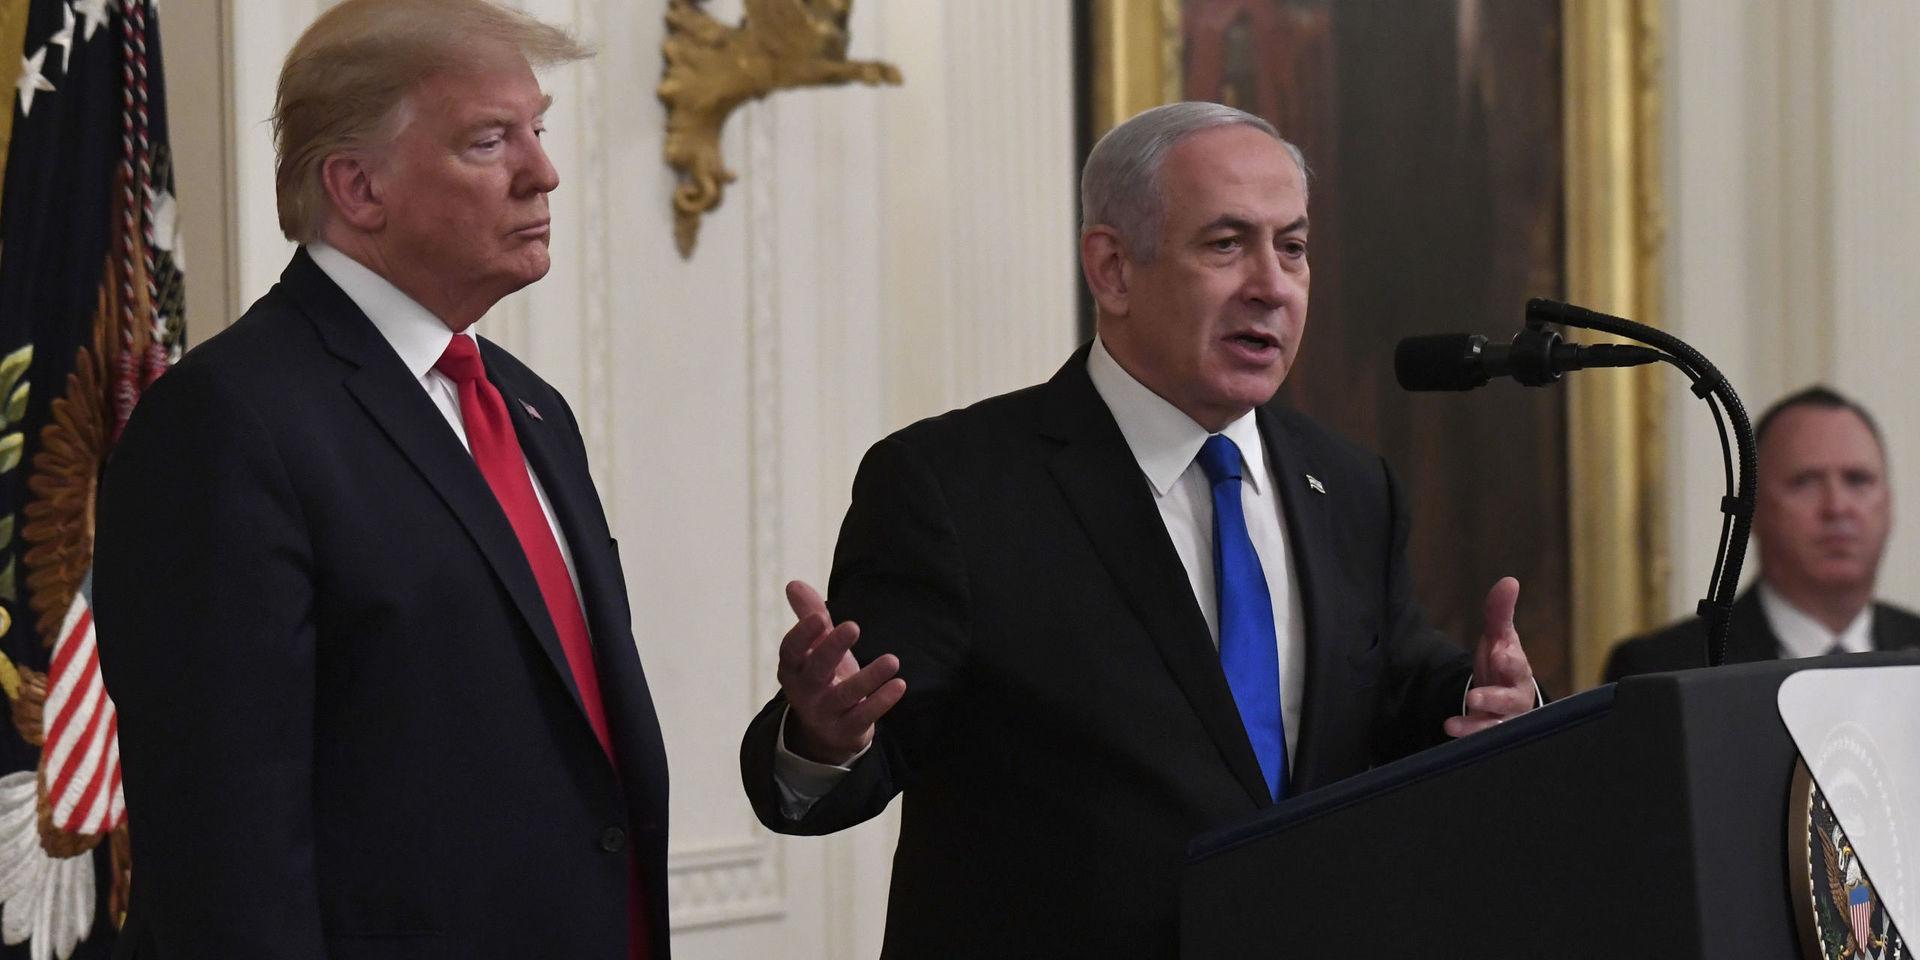 President Donald Trump, left, listens as Israeli Prime Minister Benjamin Netanyahu, right, speaks during an event in the East Room of the White House in Washington, Tuesday, Jan. 28, 2020, to announce the Trump administration&apos;s much-anticipated plan to resolve the Israeli-Palestinian conflict. (AP Photo/Susan Walsh)  DCSW116